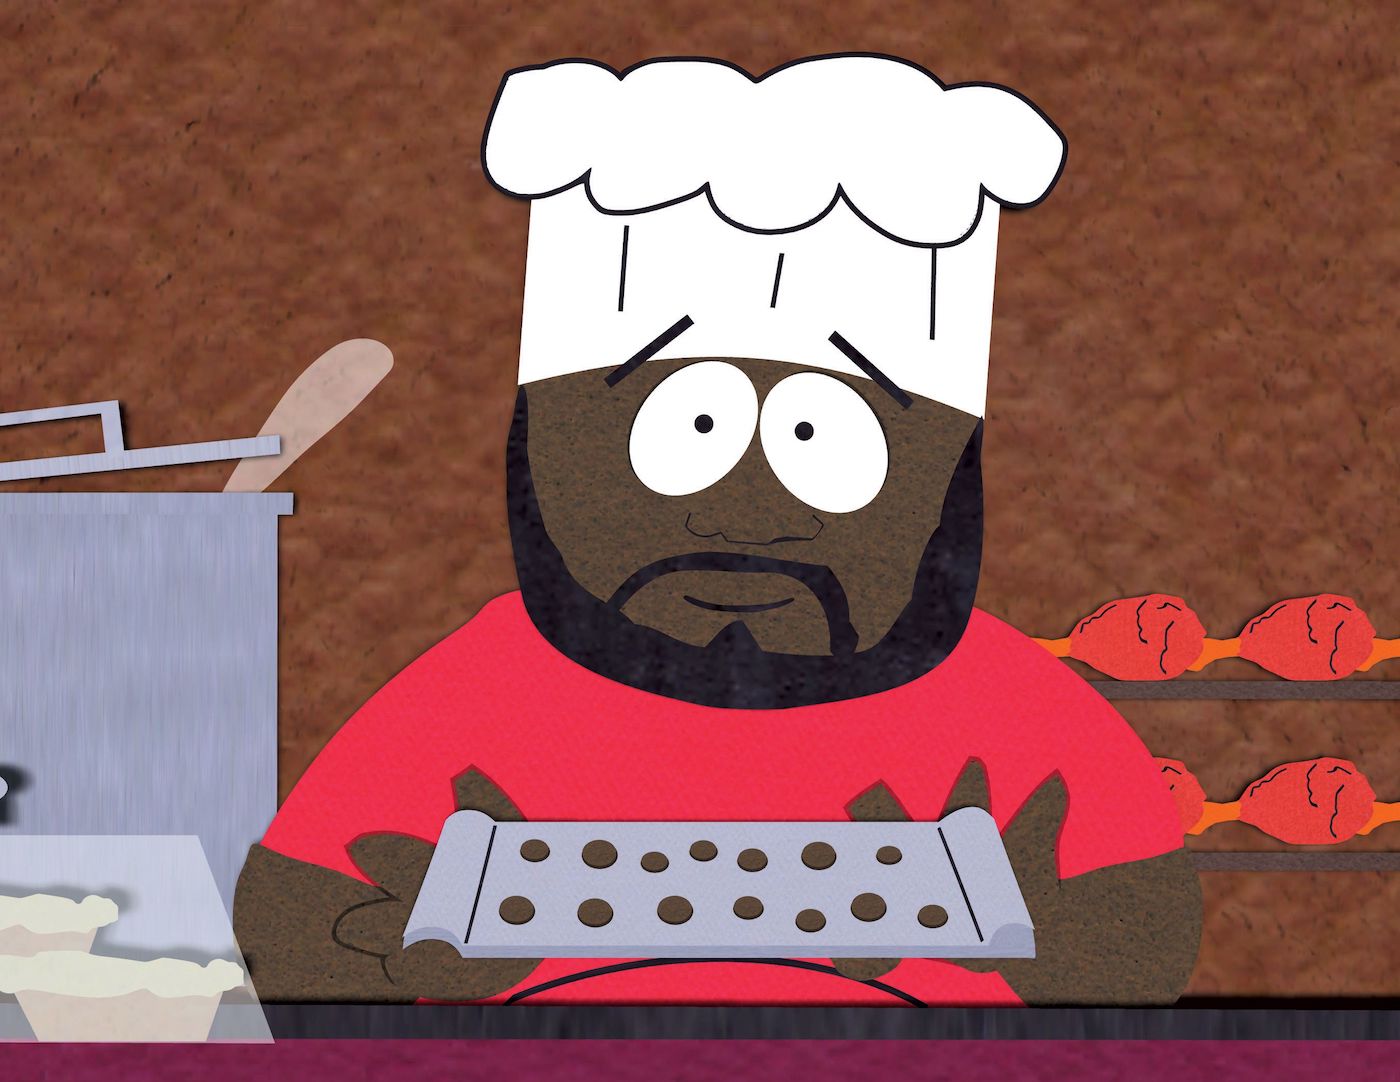 'South Park' cartoon character holds a pan of his chocolate salty balls in a kitchen